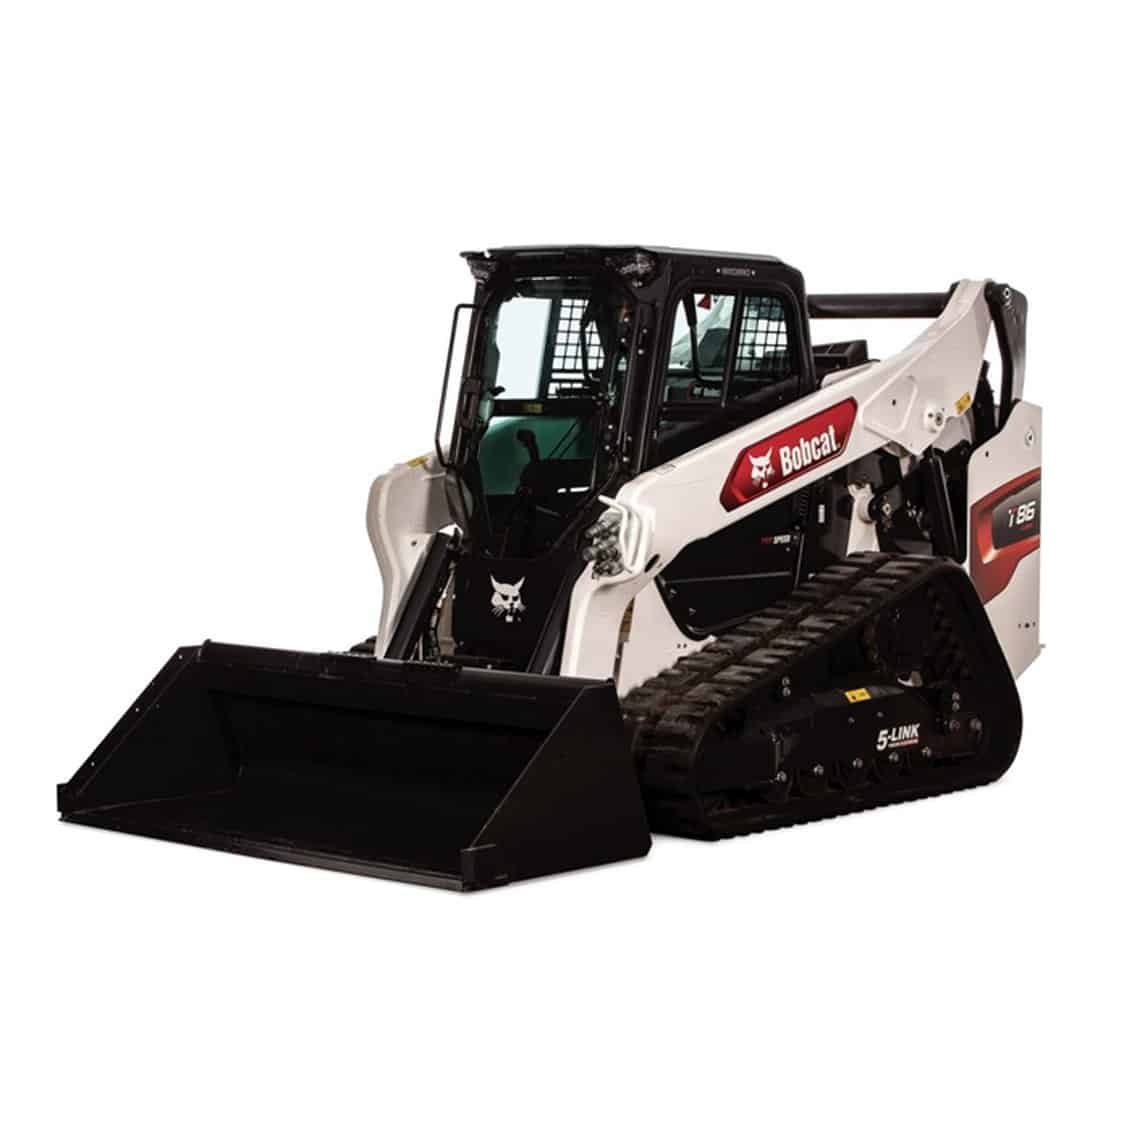 Browse Specs and more for the Bobcat T86 Compact Track Loader - White Star Machinery